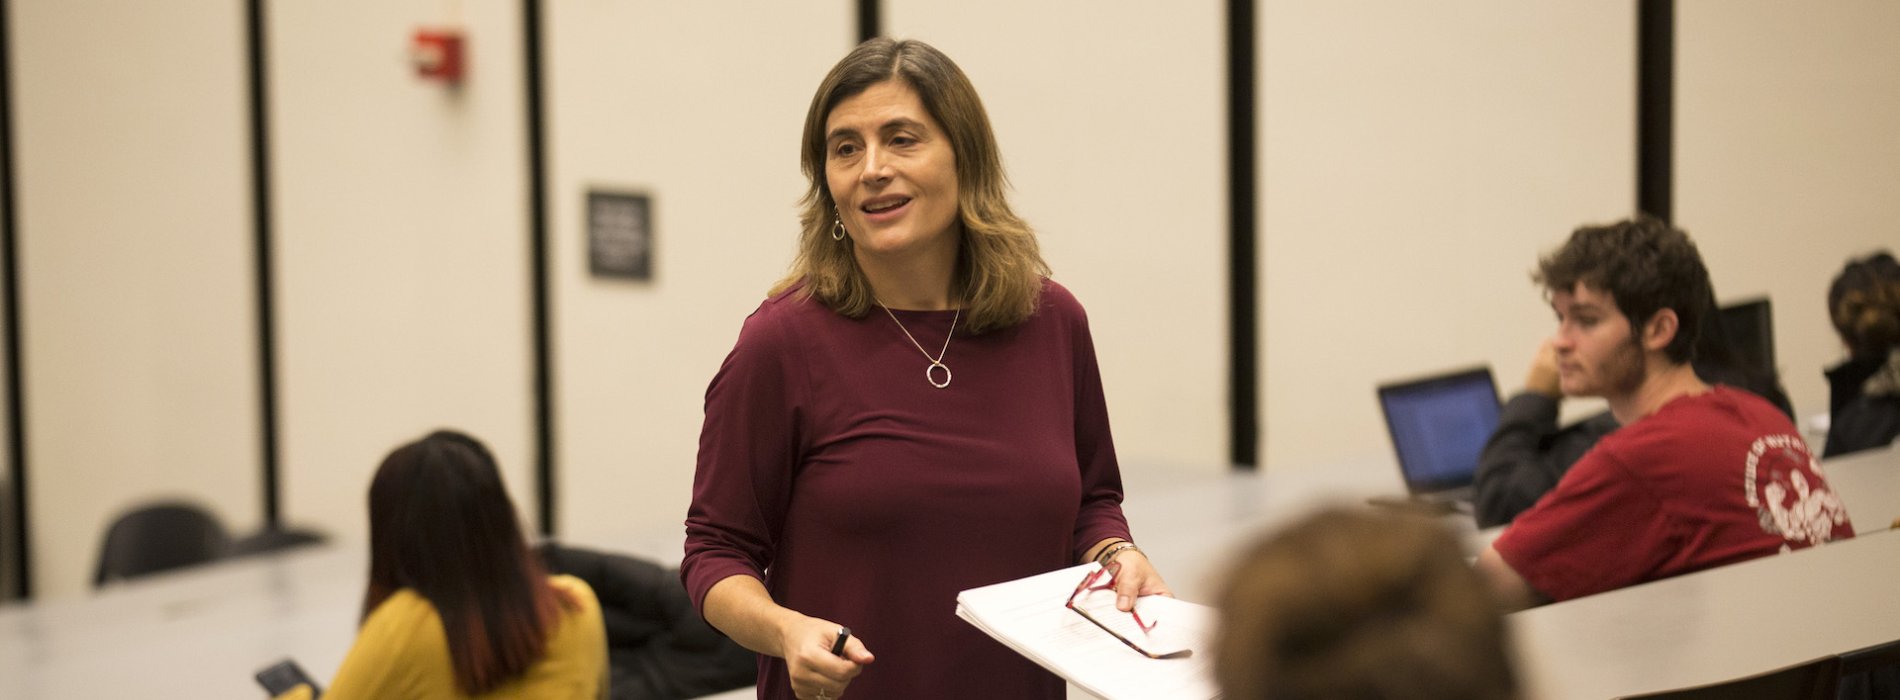 Dr. Erin Bell teaching a classroom of students in a lecture hall